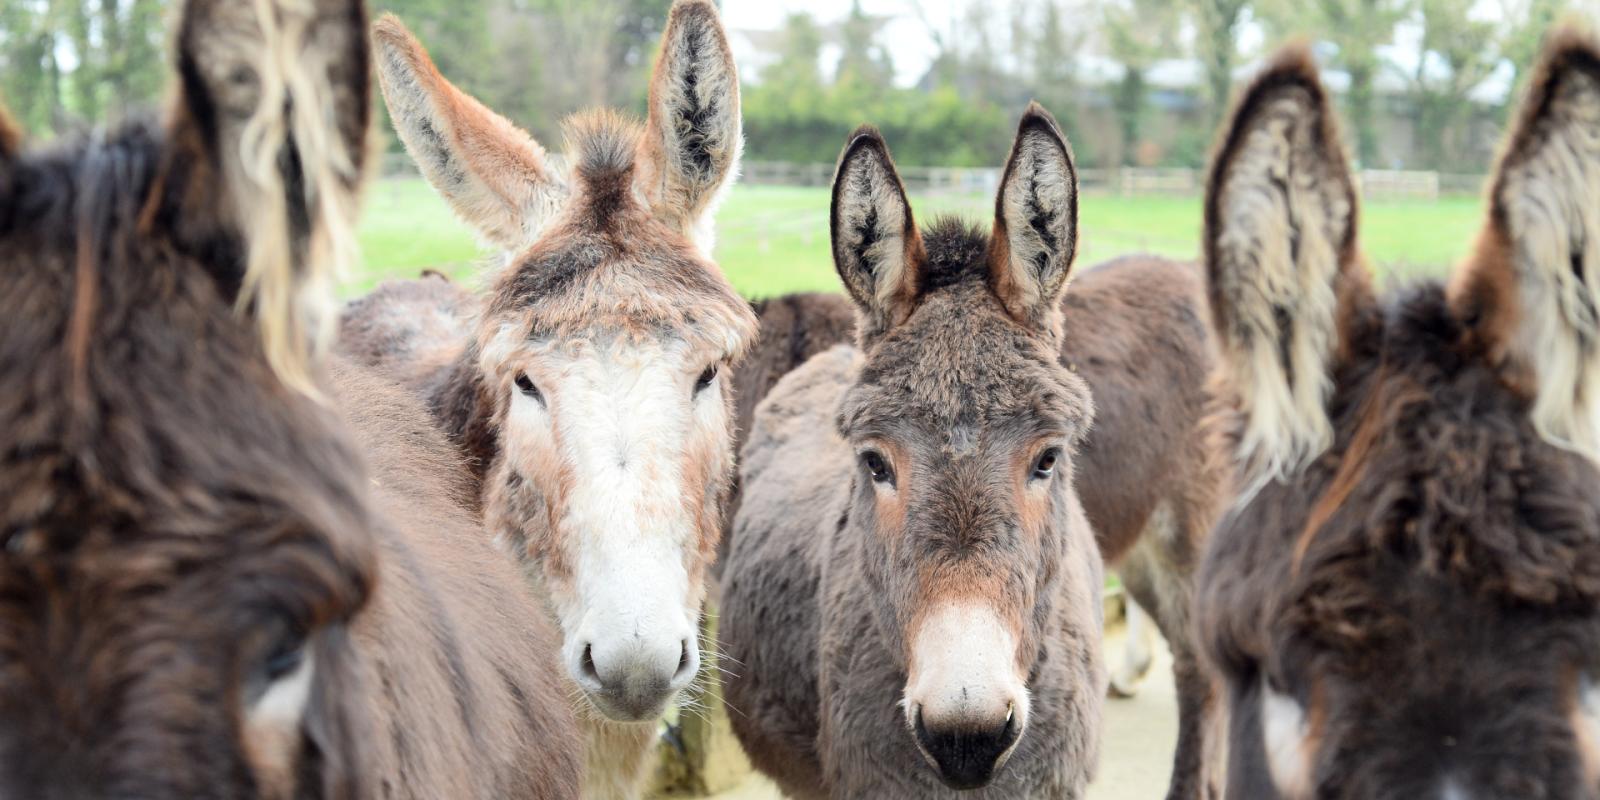 Donkeys in our care